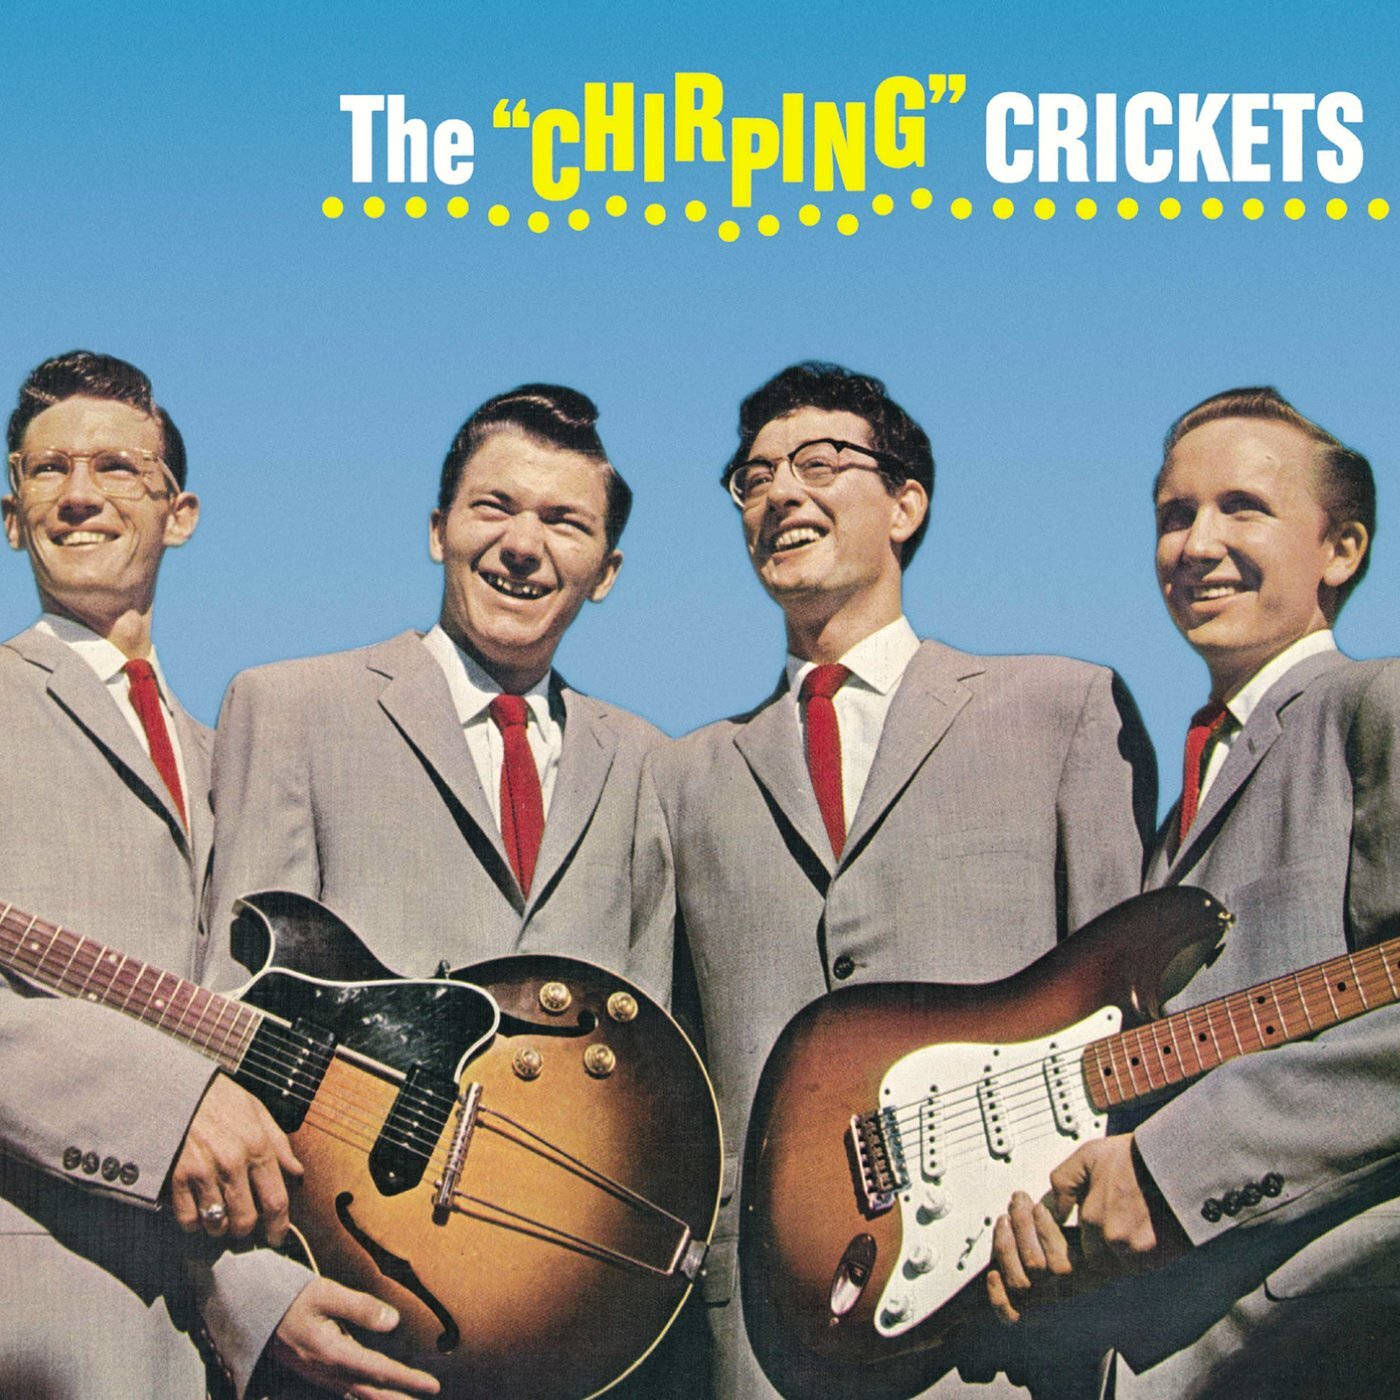 Vintage Album Cover - Buddy Holly&The Crickets Wallpaper